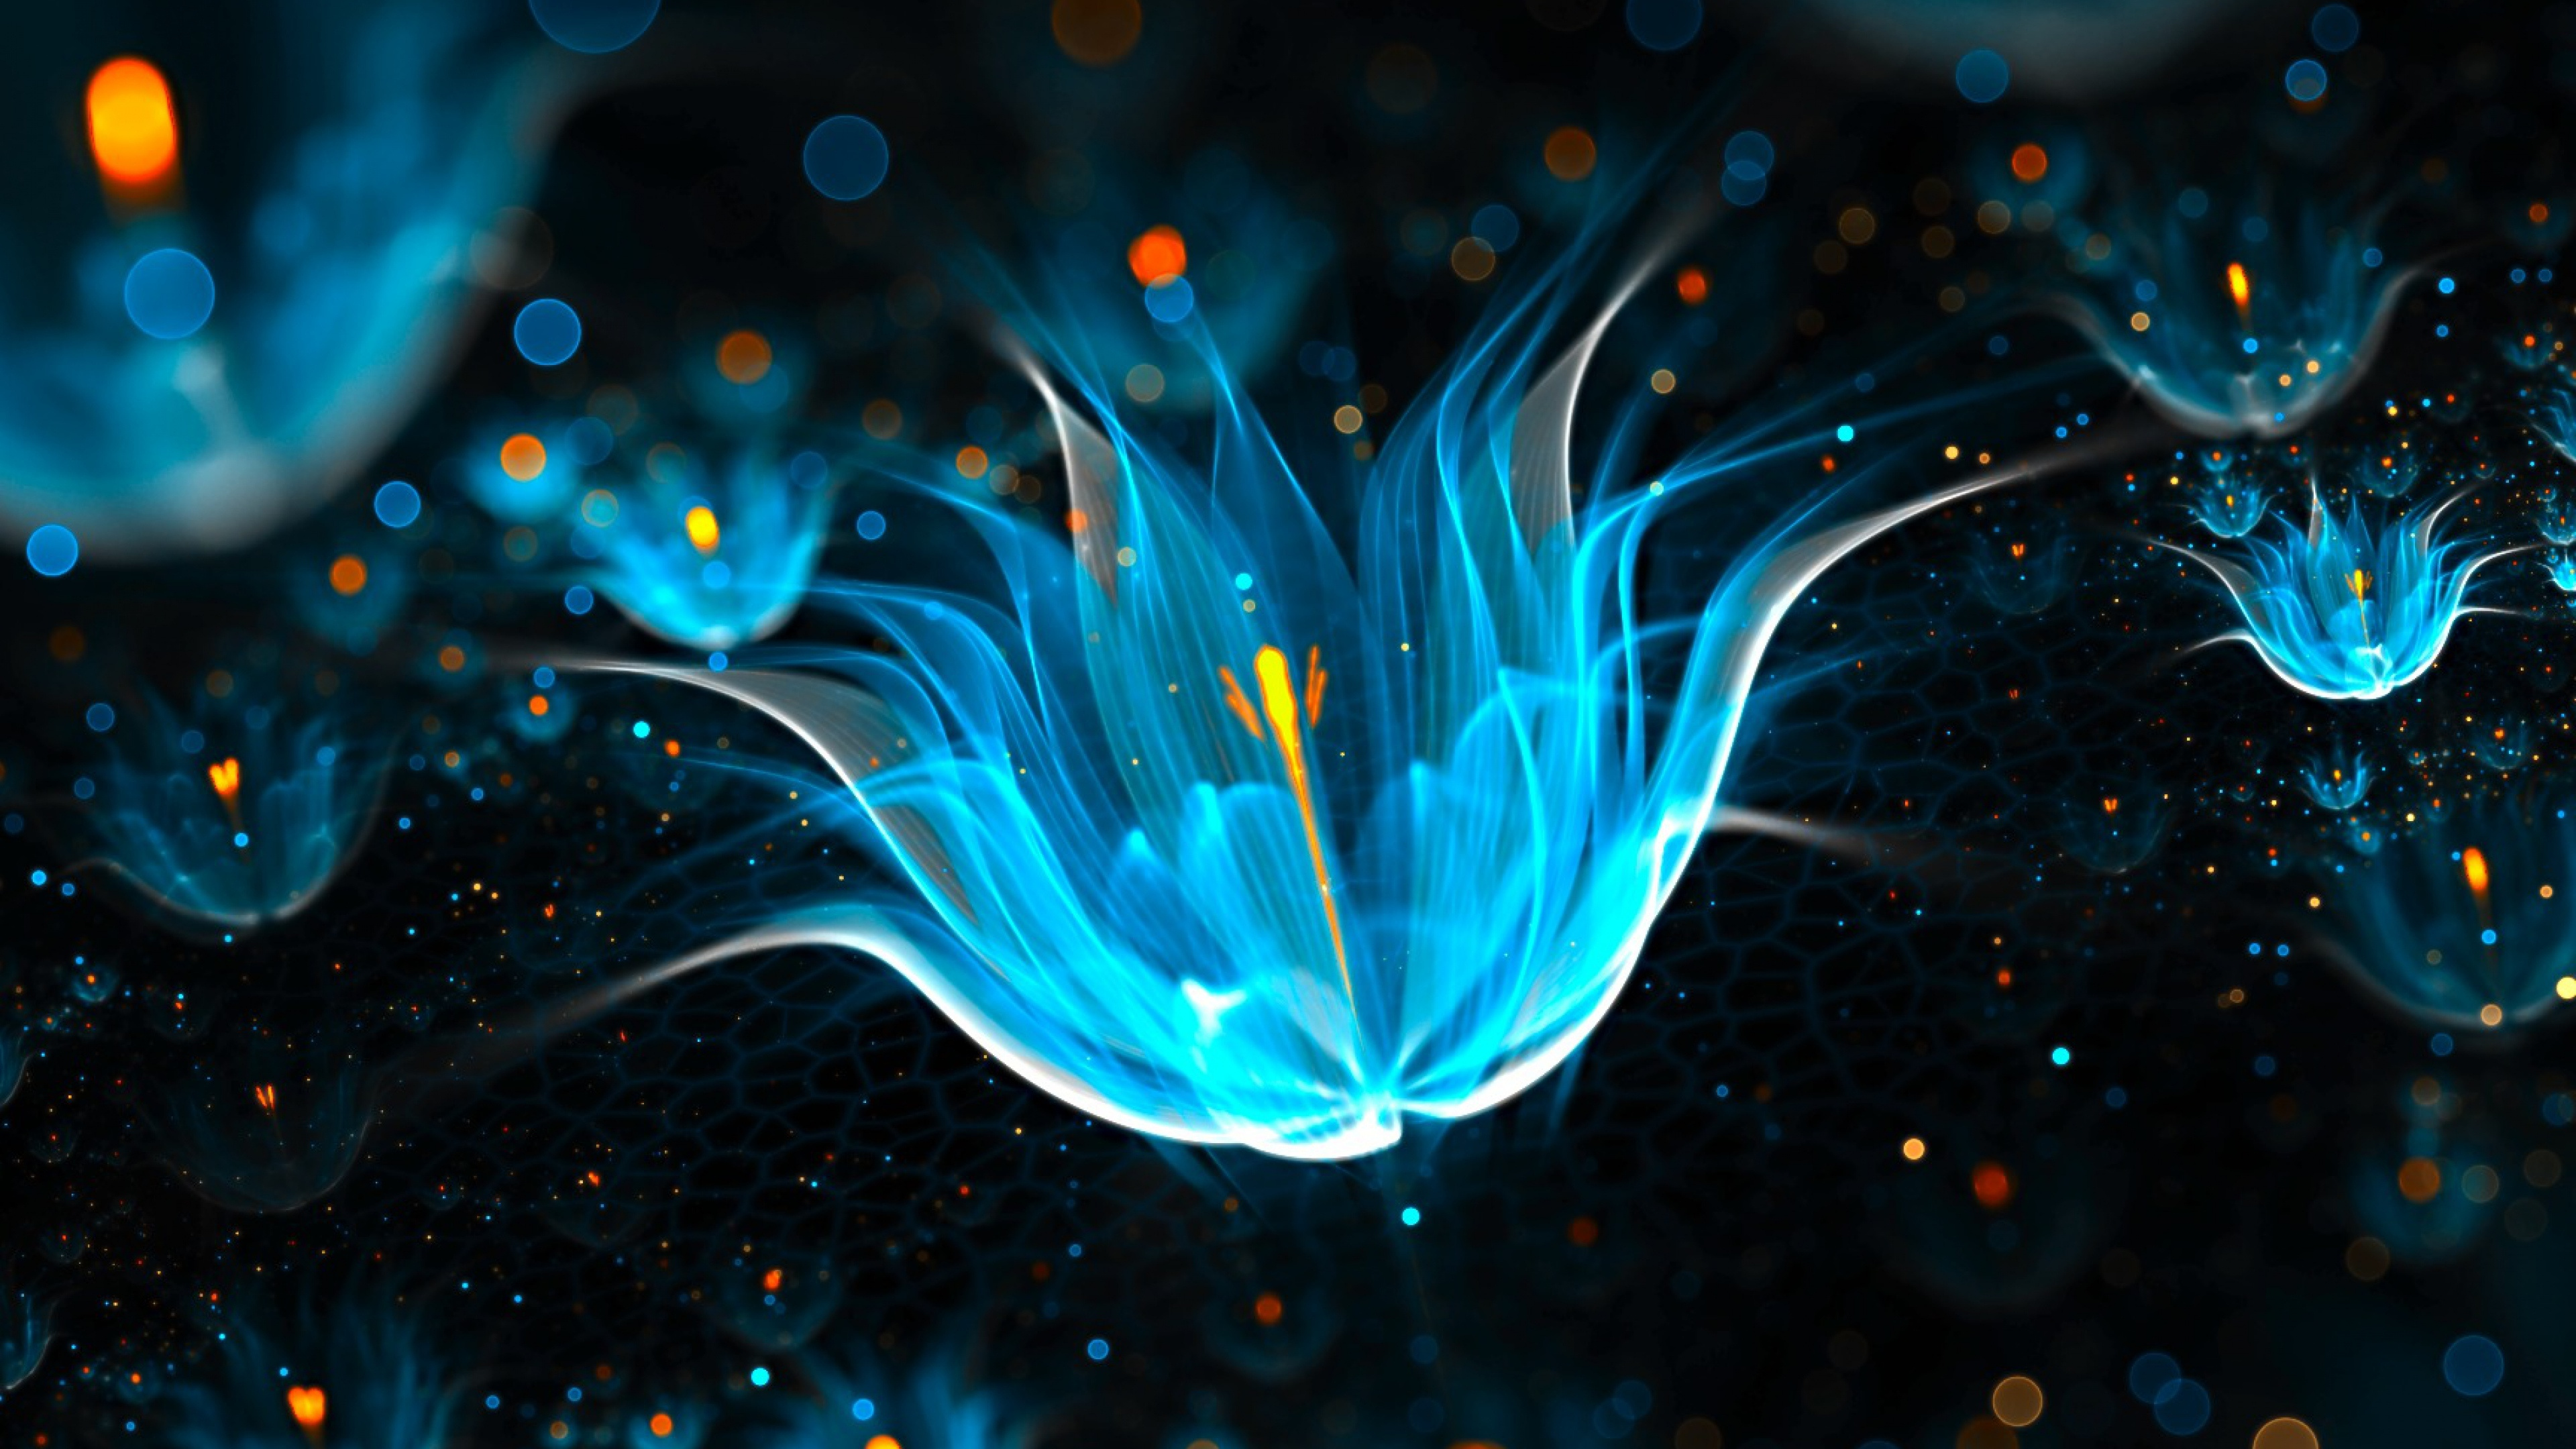 Blue and White Light Illustration. Wallpaper in 3840x2160 Resolution